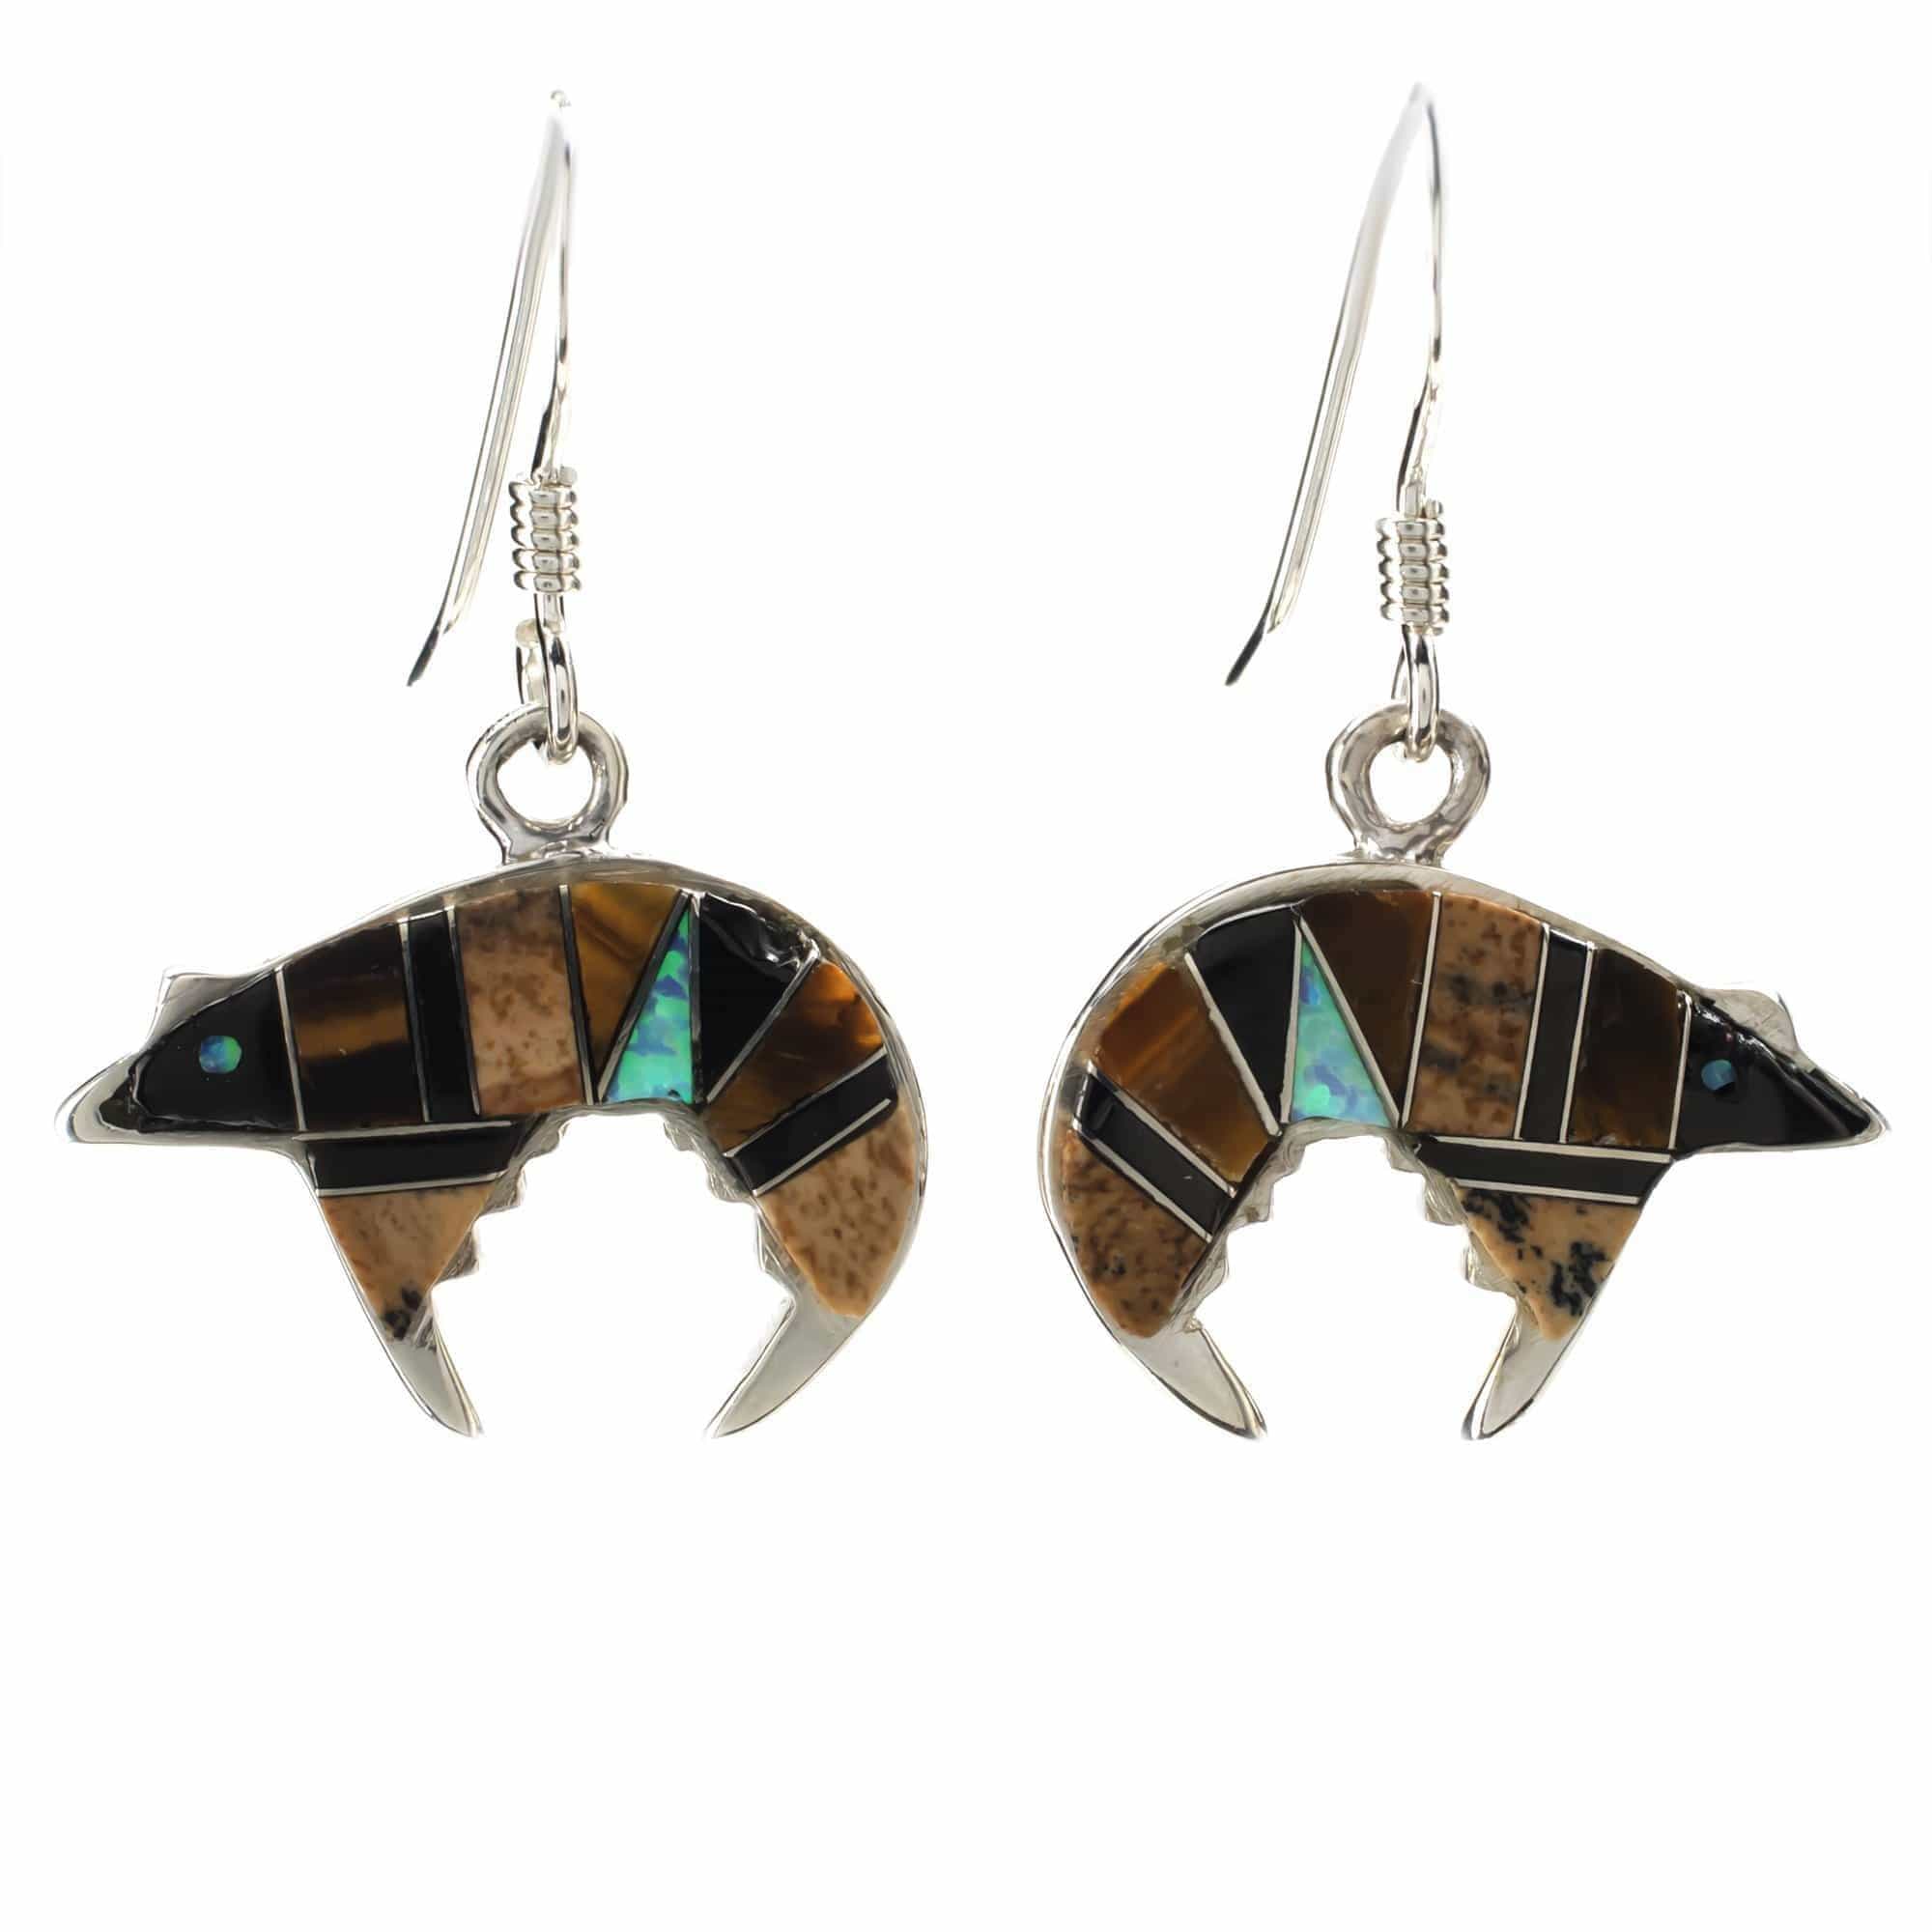 Kalifano Southwest Silver Jewelry Tiger Eye Bear 925 Sterling Silver Earring with French Hook USA Handmade with Black Onyx and Opal Accent NME.0755.TE